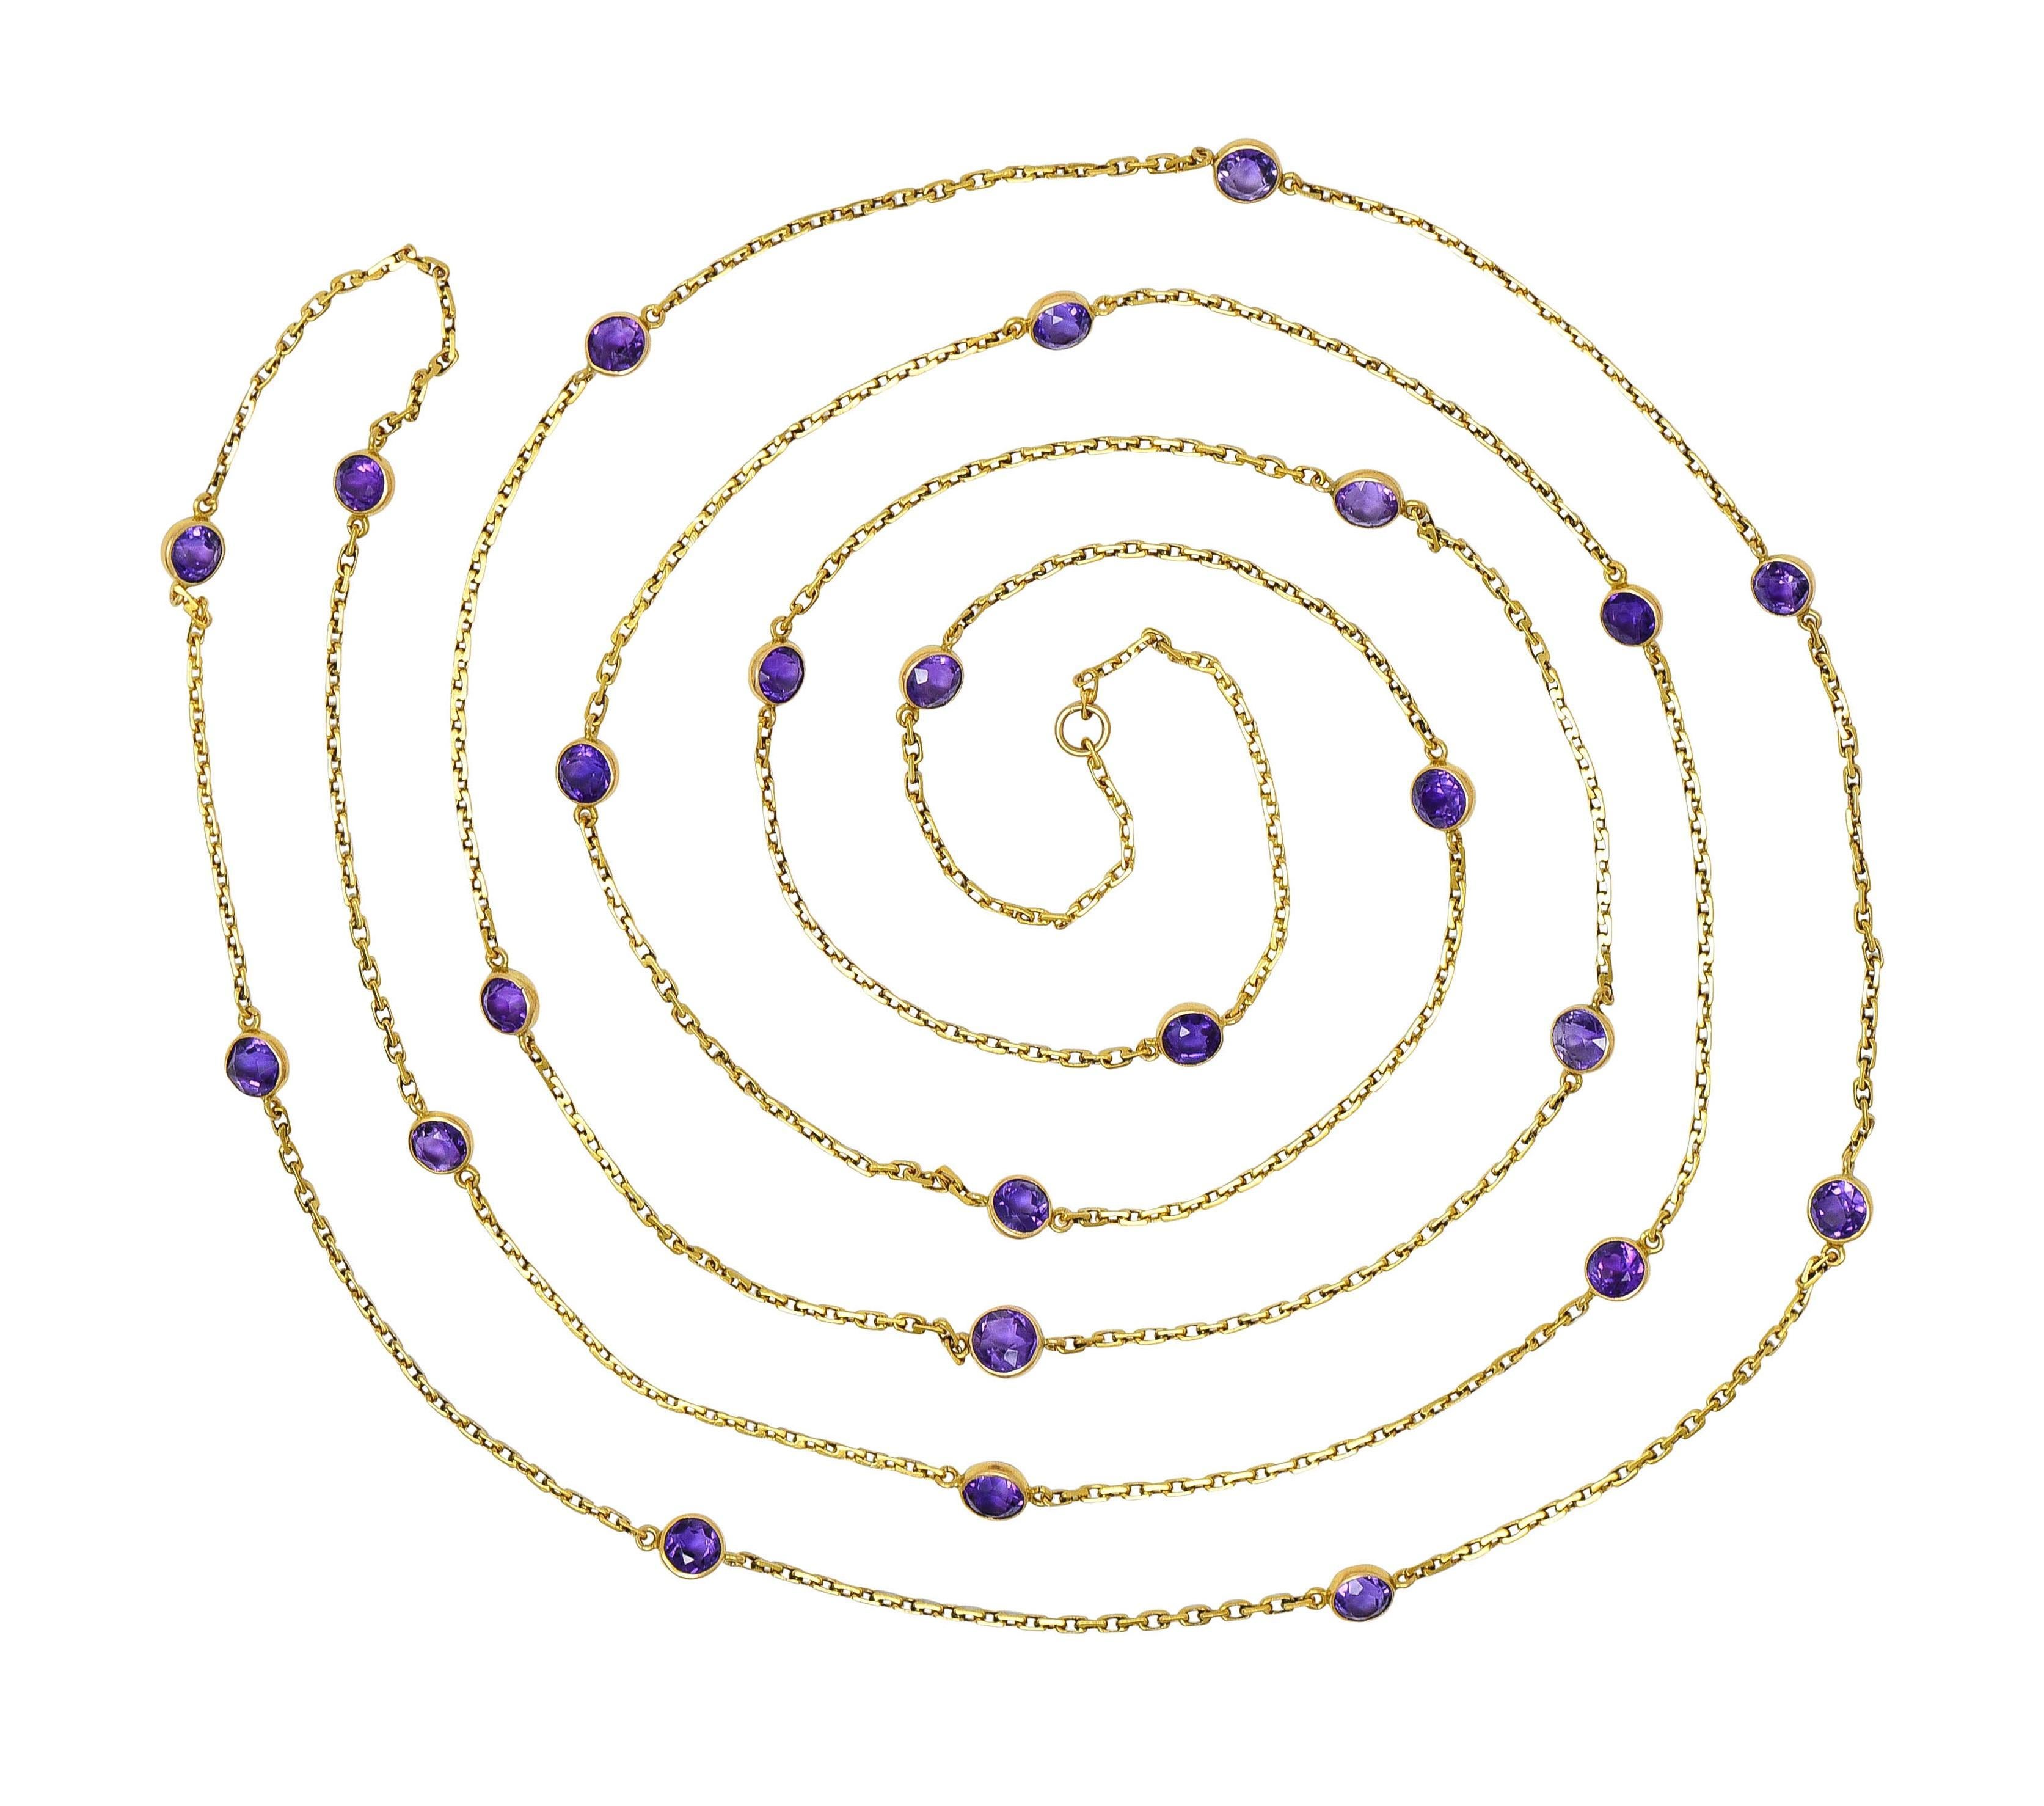 Designed as 1.5 mm fancy cable link chain with twenty-four stations 
Comprised of bezel set 5.2 mm round cut amethyst 
Transparent medium purple in color 
With jump ring fob bale 
Tested as 18 karat gold
Circa: 1860s
Width at widest: 5.5 mm 
Total